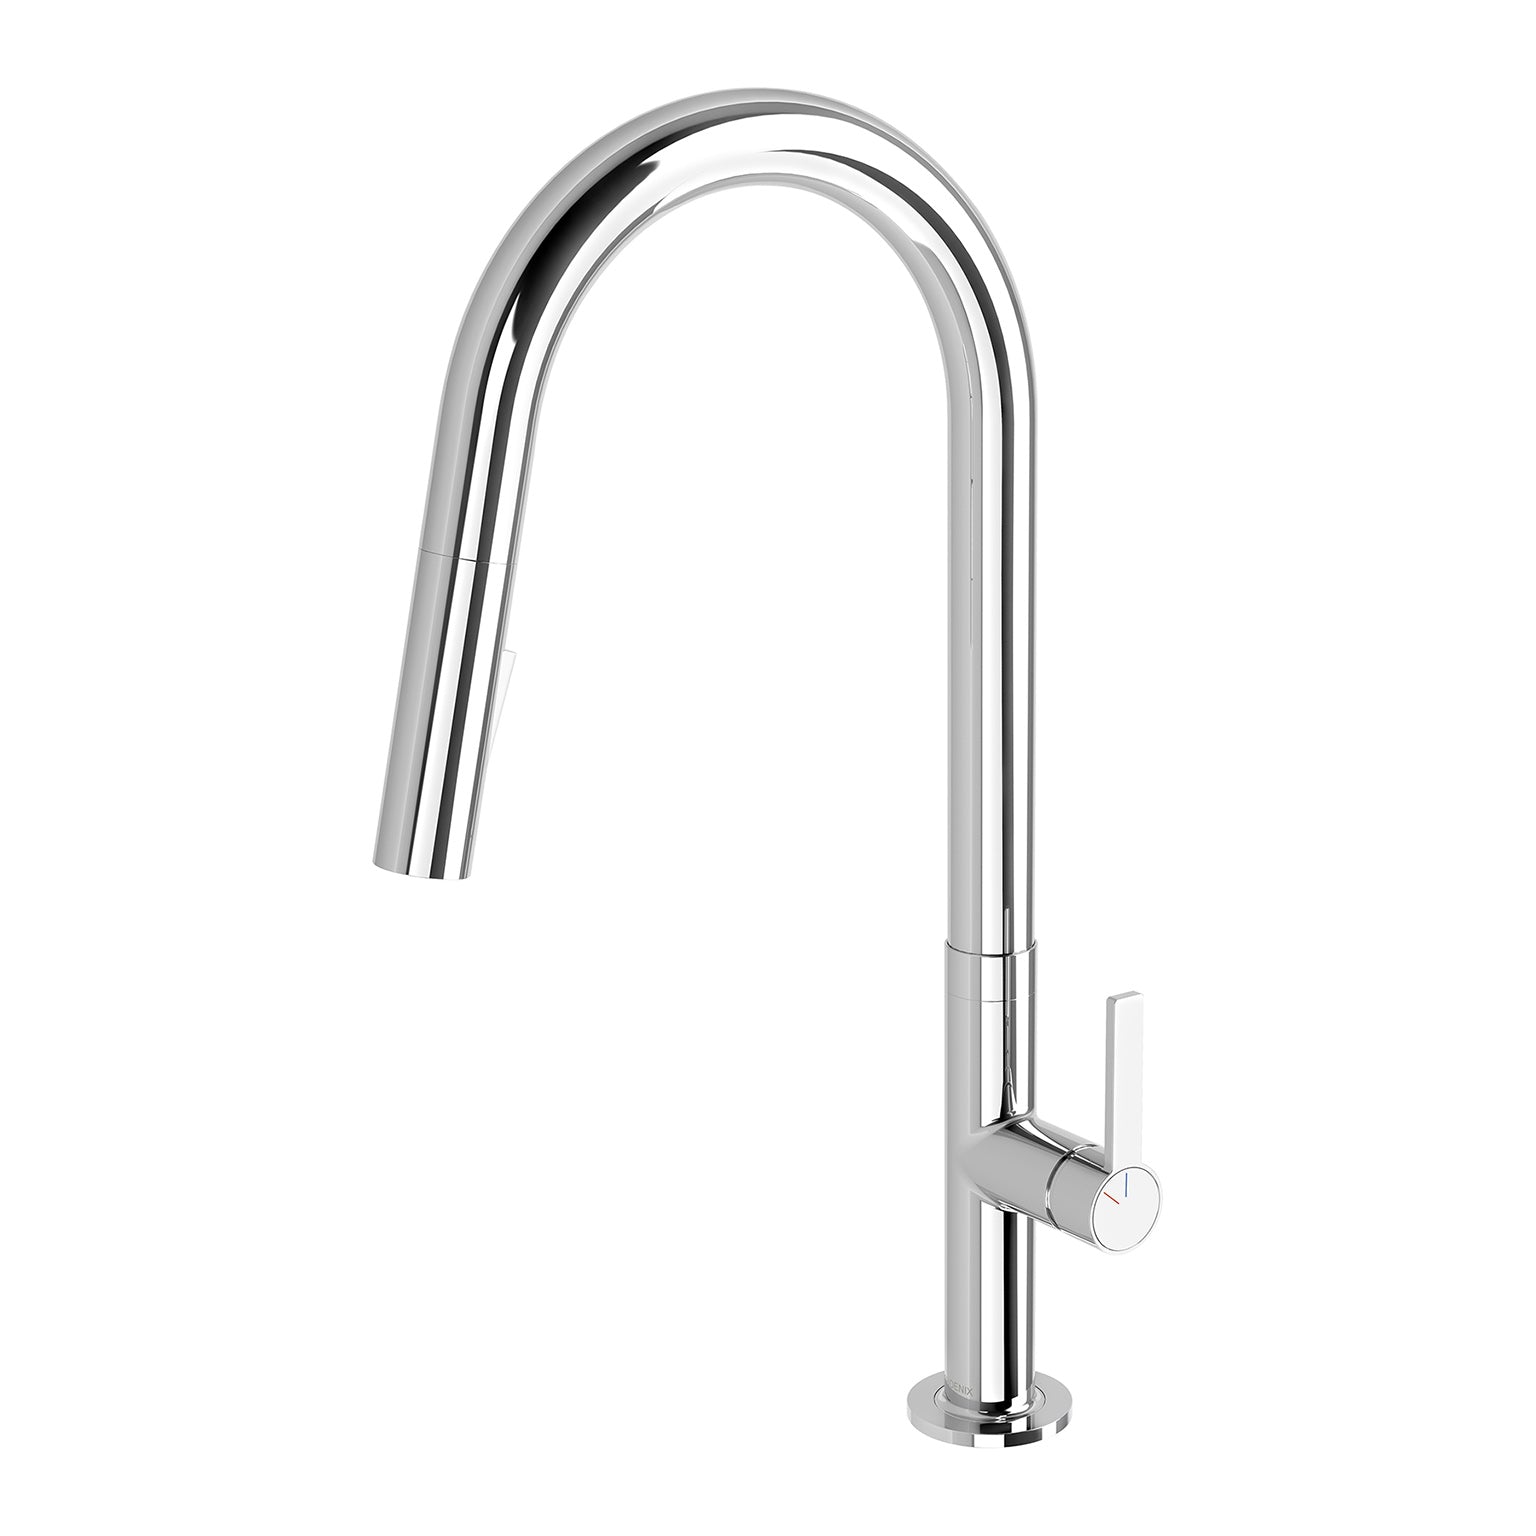 PHOENIX LEXI MKII PULL OUT SINK MIXER CHROME